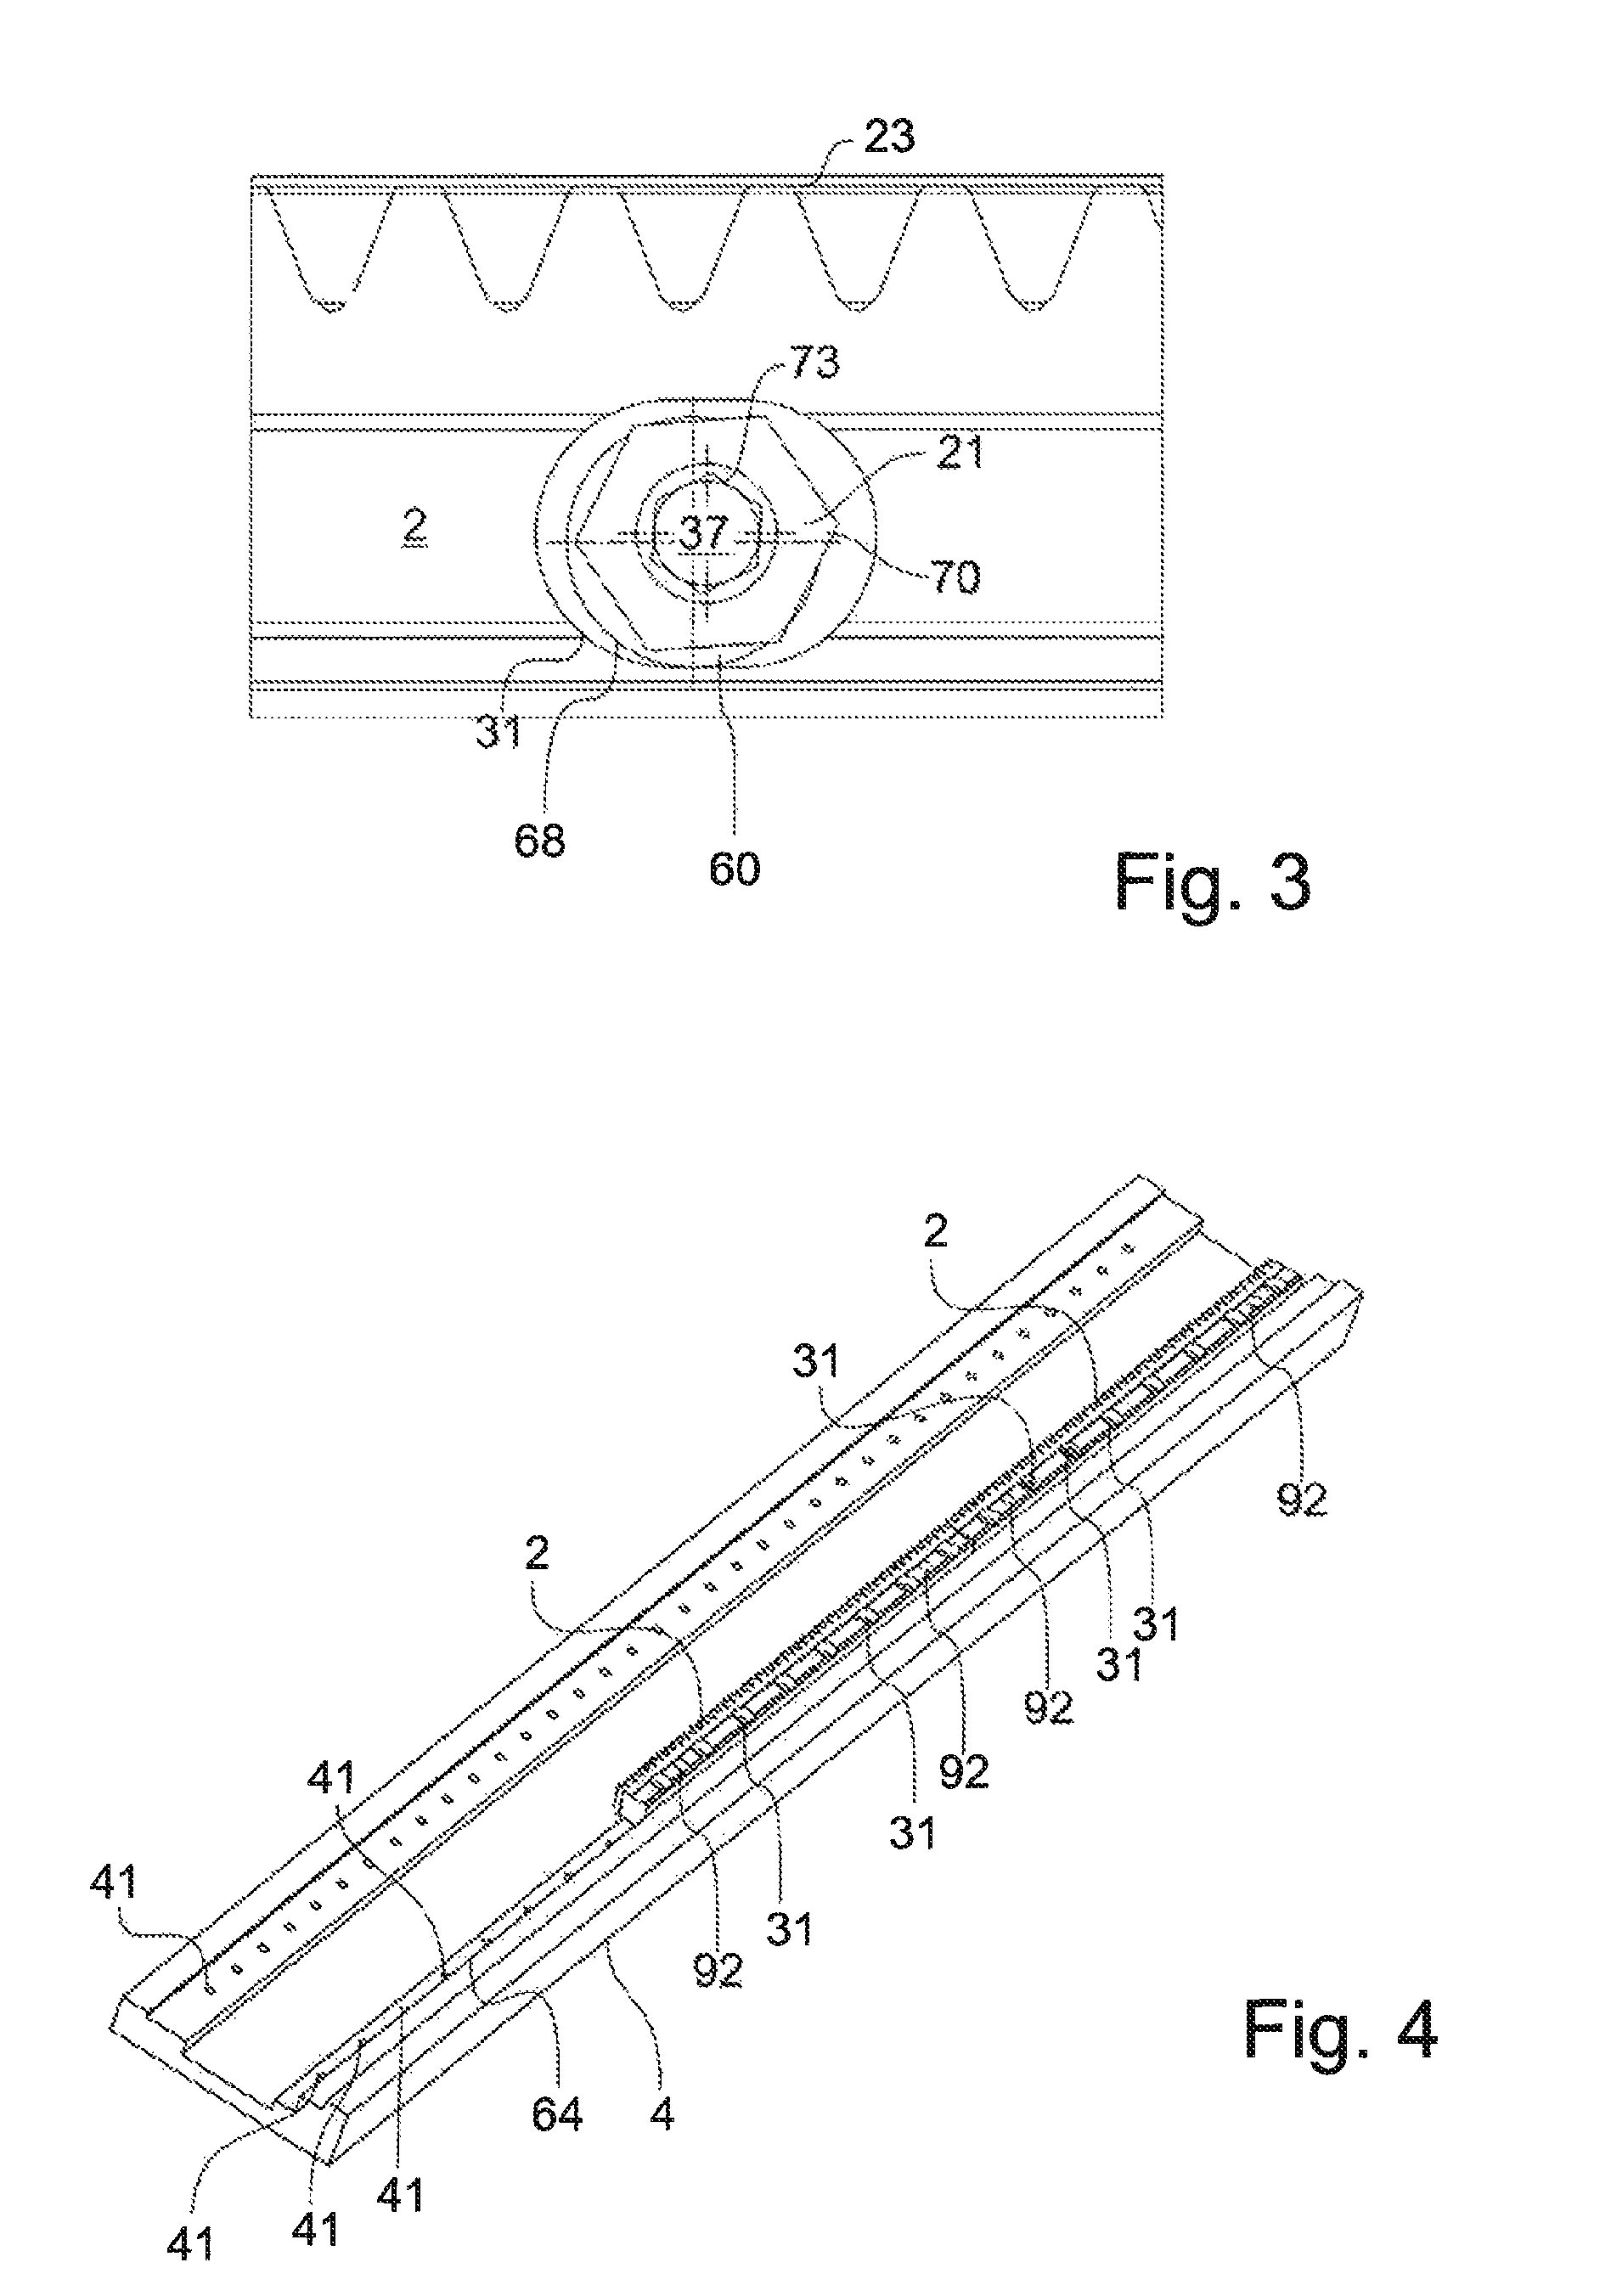 Fastening system with eccentric